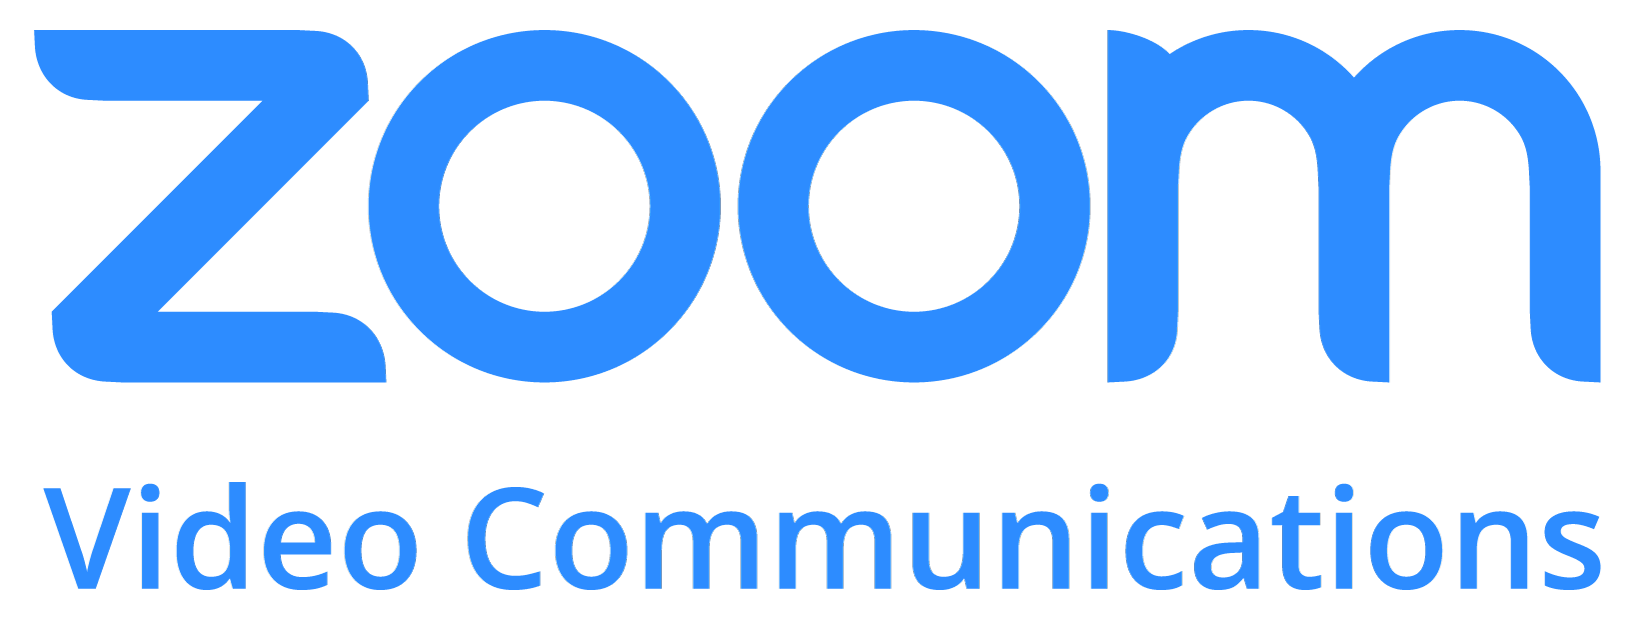 Zoom Logo History, Symbol, Meaning And Evolution